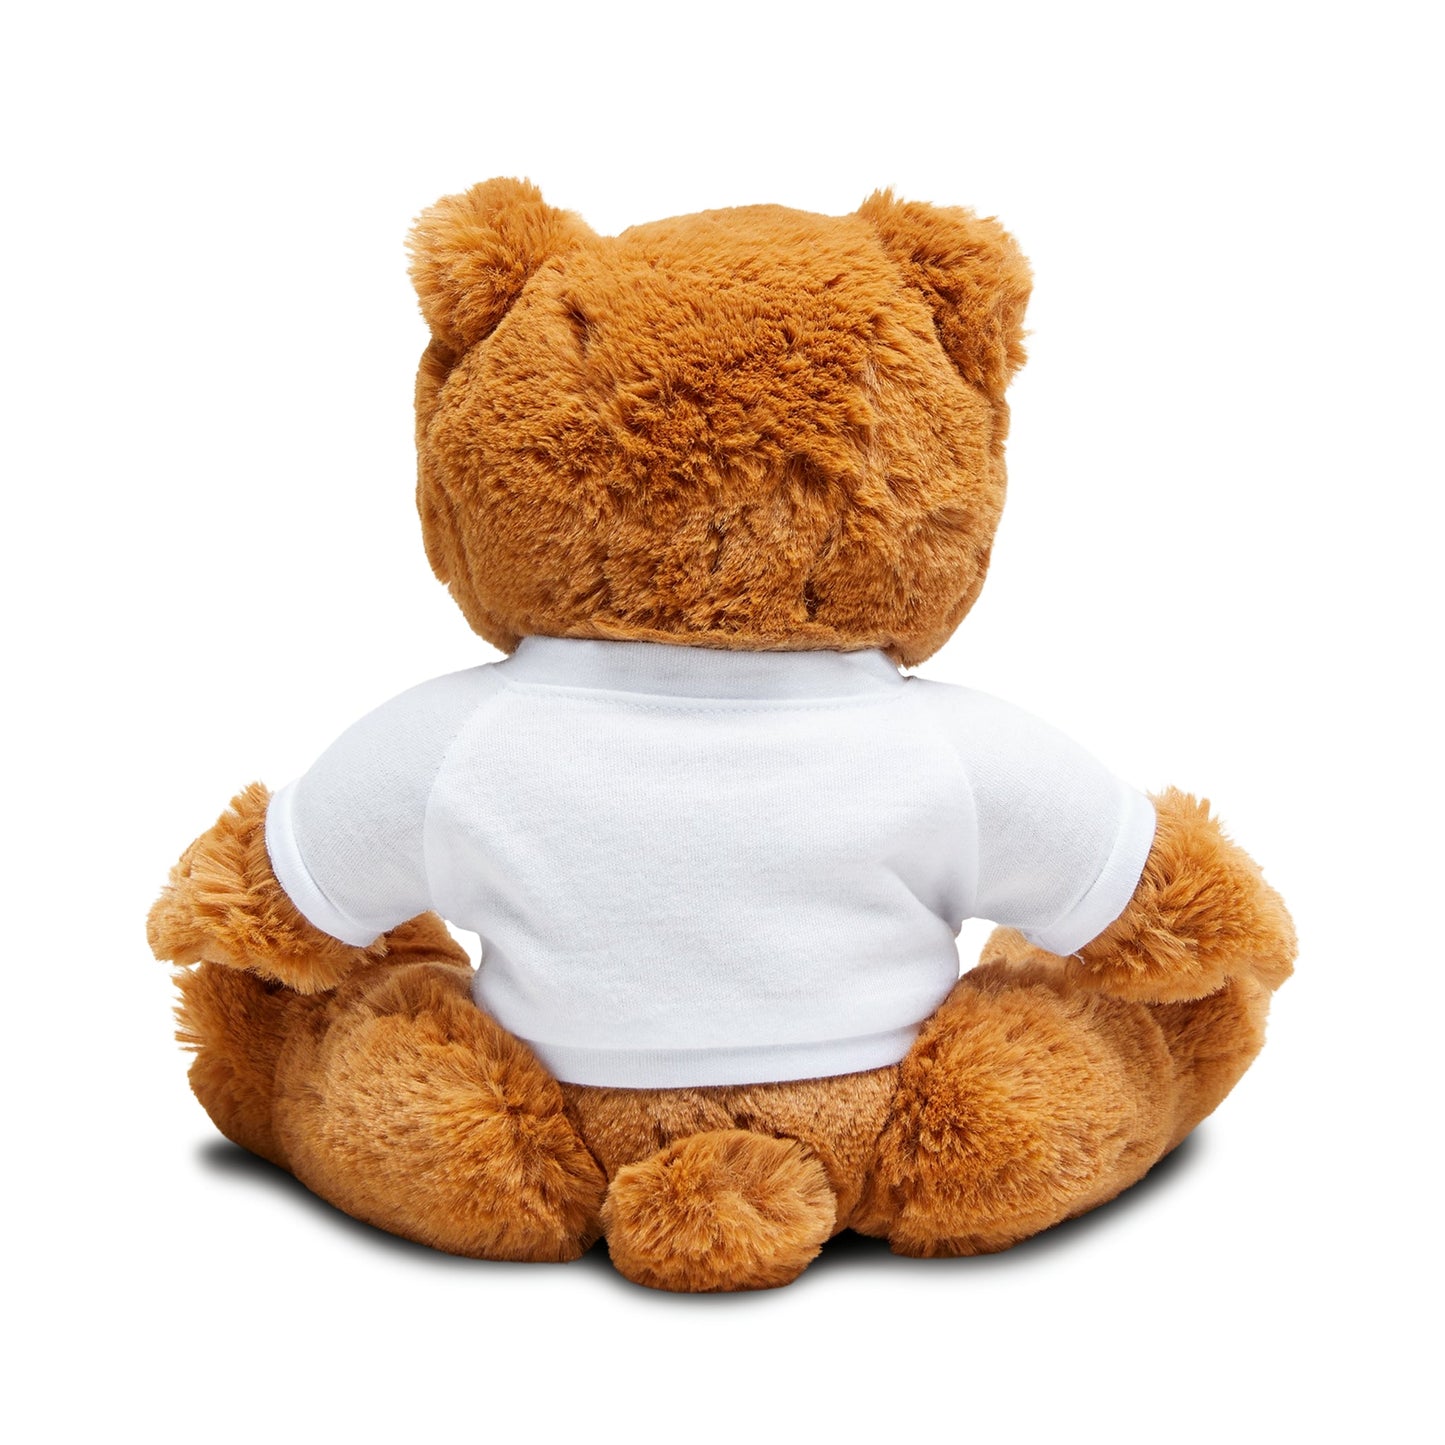 Teddy Bear with T-Shirt - Obey - Premium Teddy Bear with T-Shirt from Concordia Style Boutique - Just $35.90! Shop now at Concordia Style Boutique